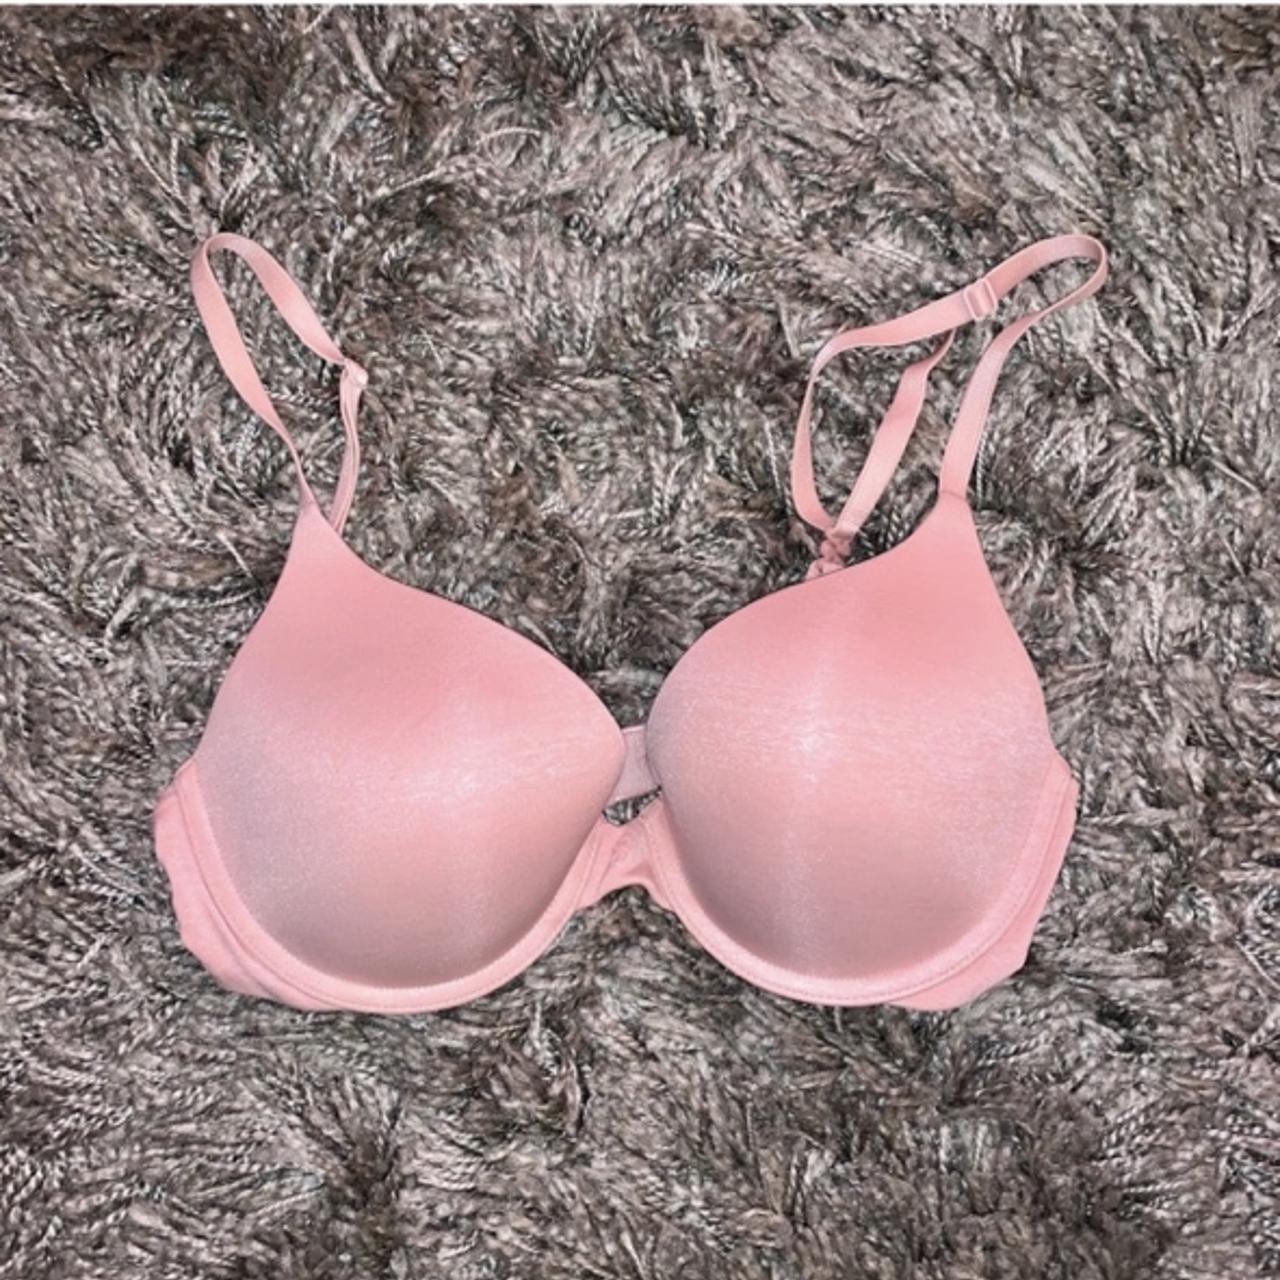 Victoria's Secret - For those moments when you want to wear a bra